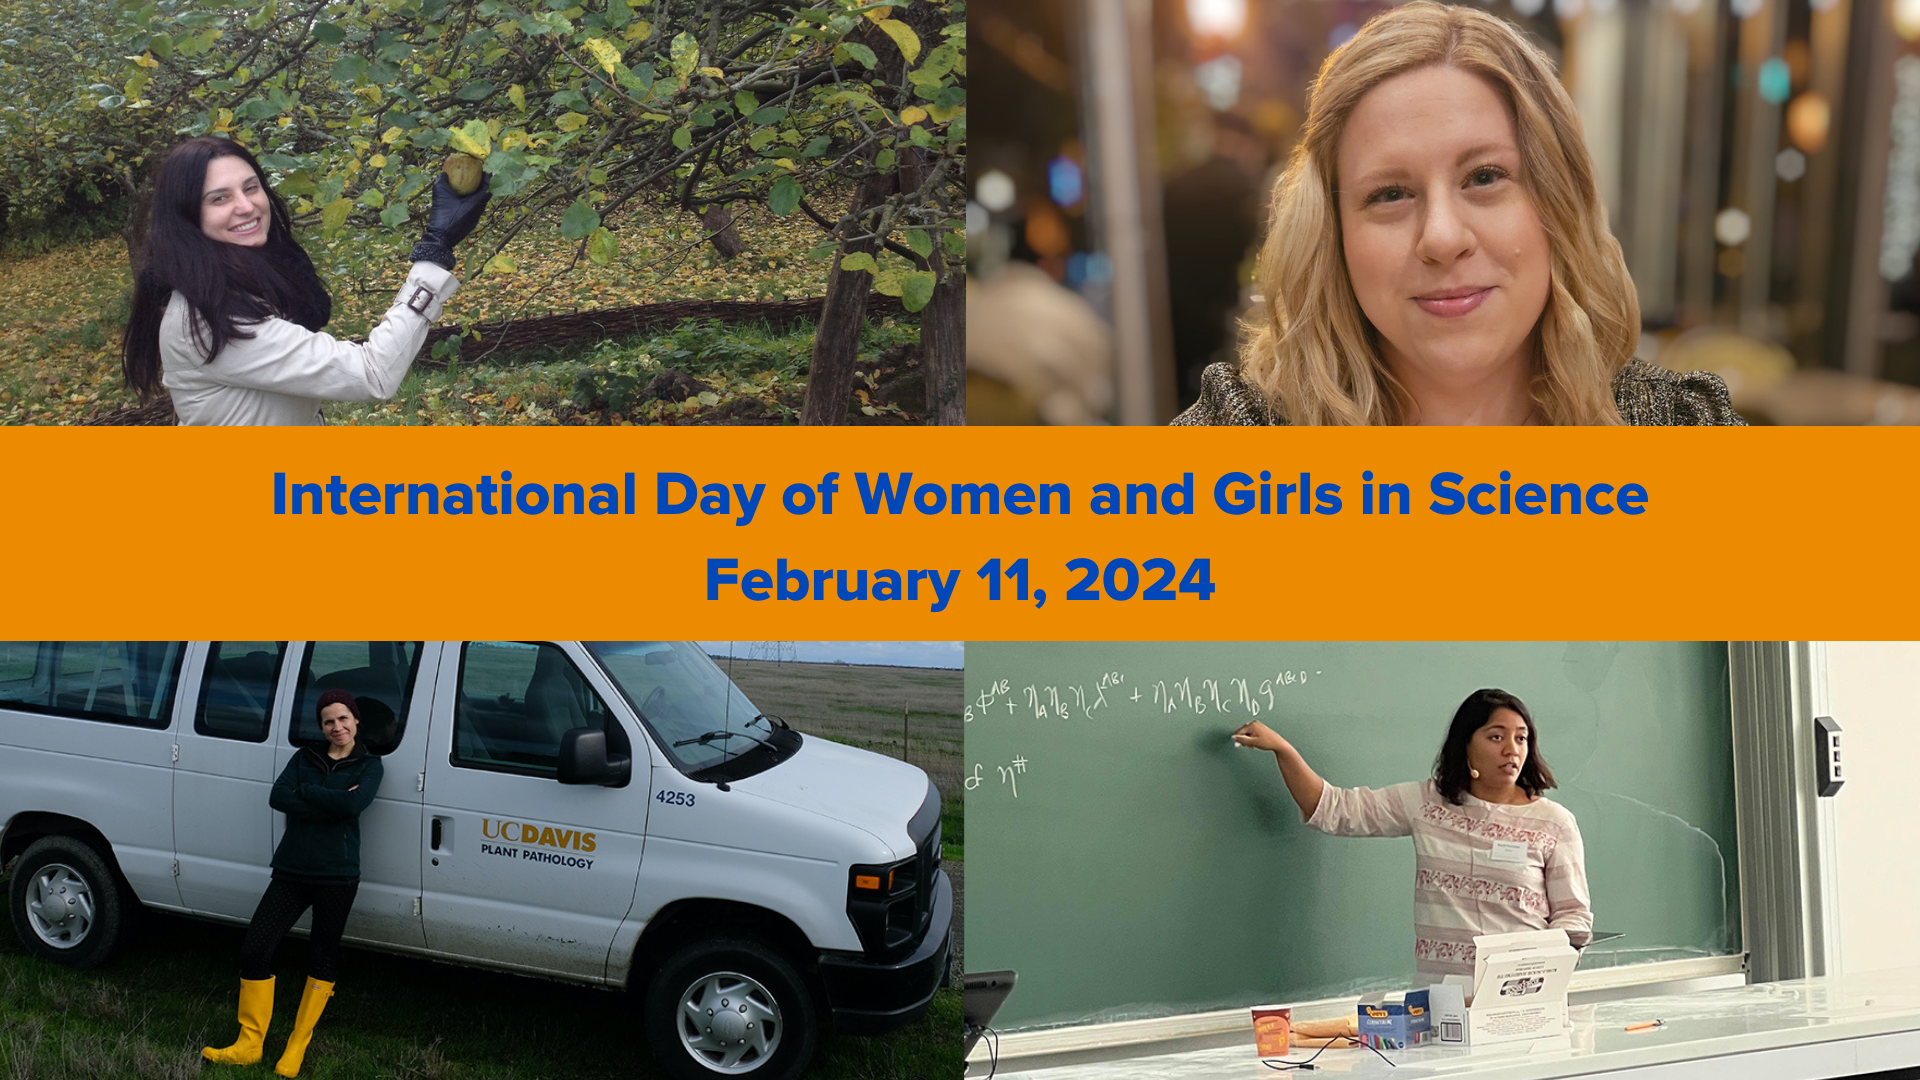 Four photos of Glaucia Helena Carvalo do Prado, Emelie Strandberg, Lucie Juraska and Shruti Paranjabe with a orange banner running through the middle that says in blue "International Day of Women and Girls in Science, February 11, 2024